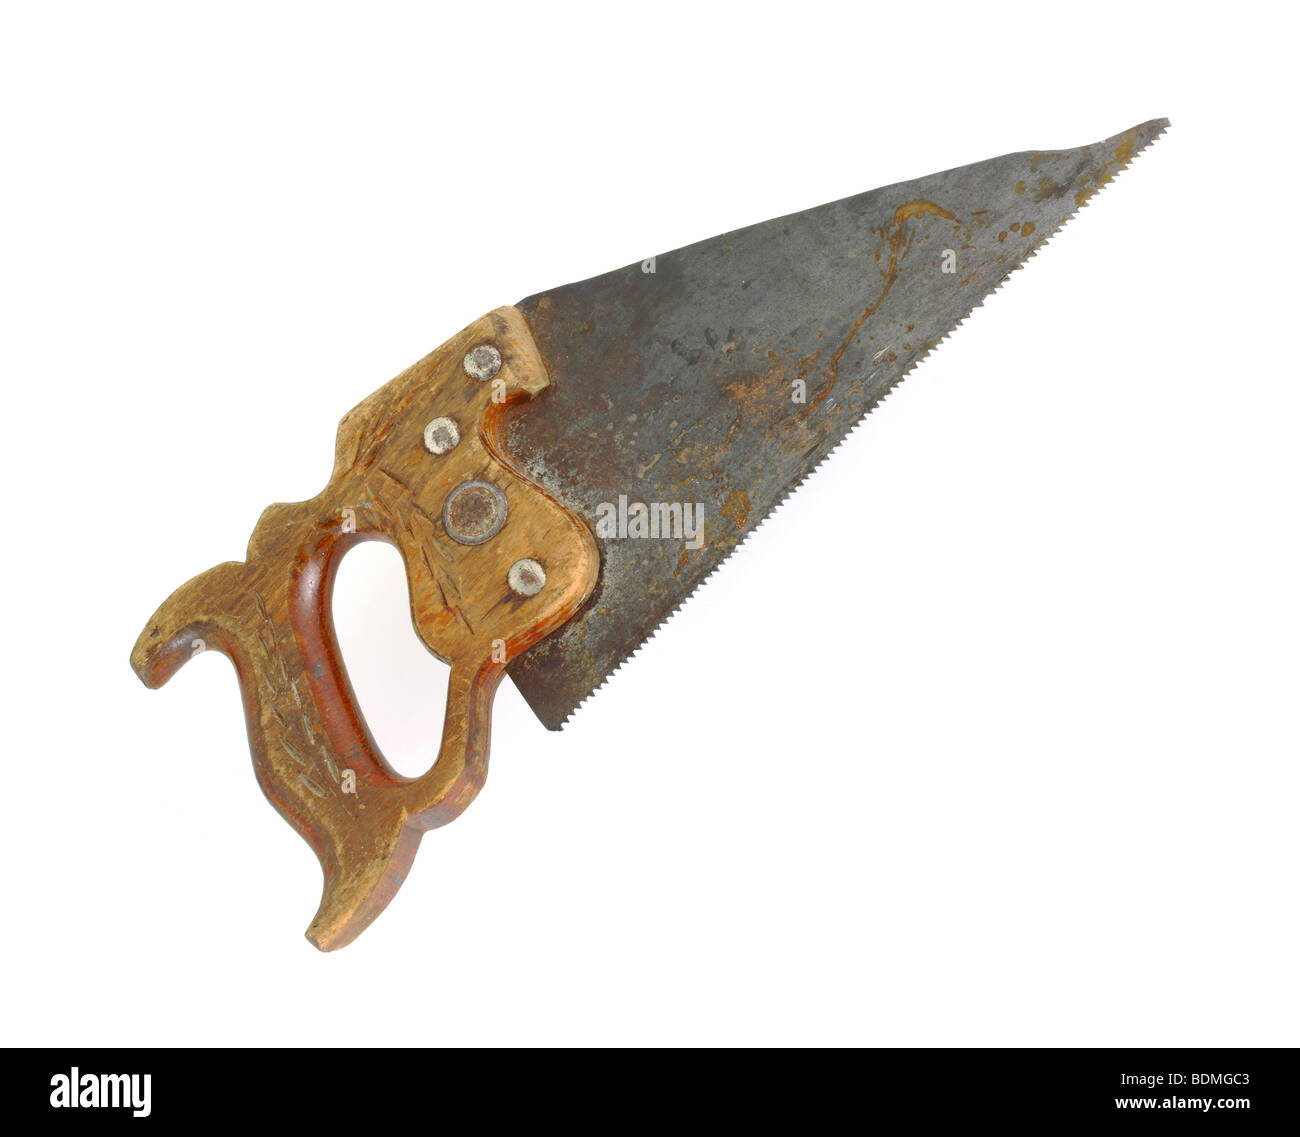 Small antique hand saw Stock Photo